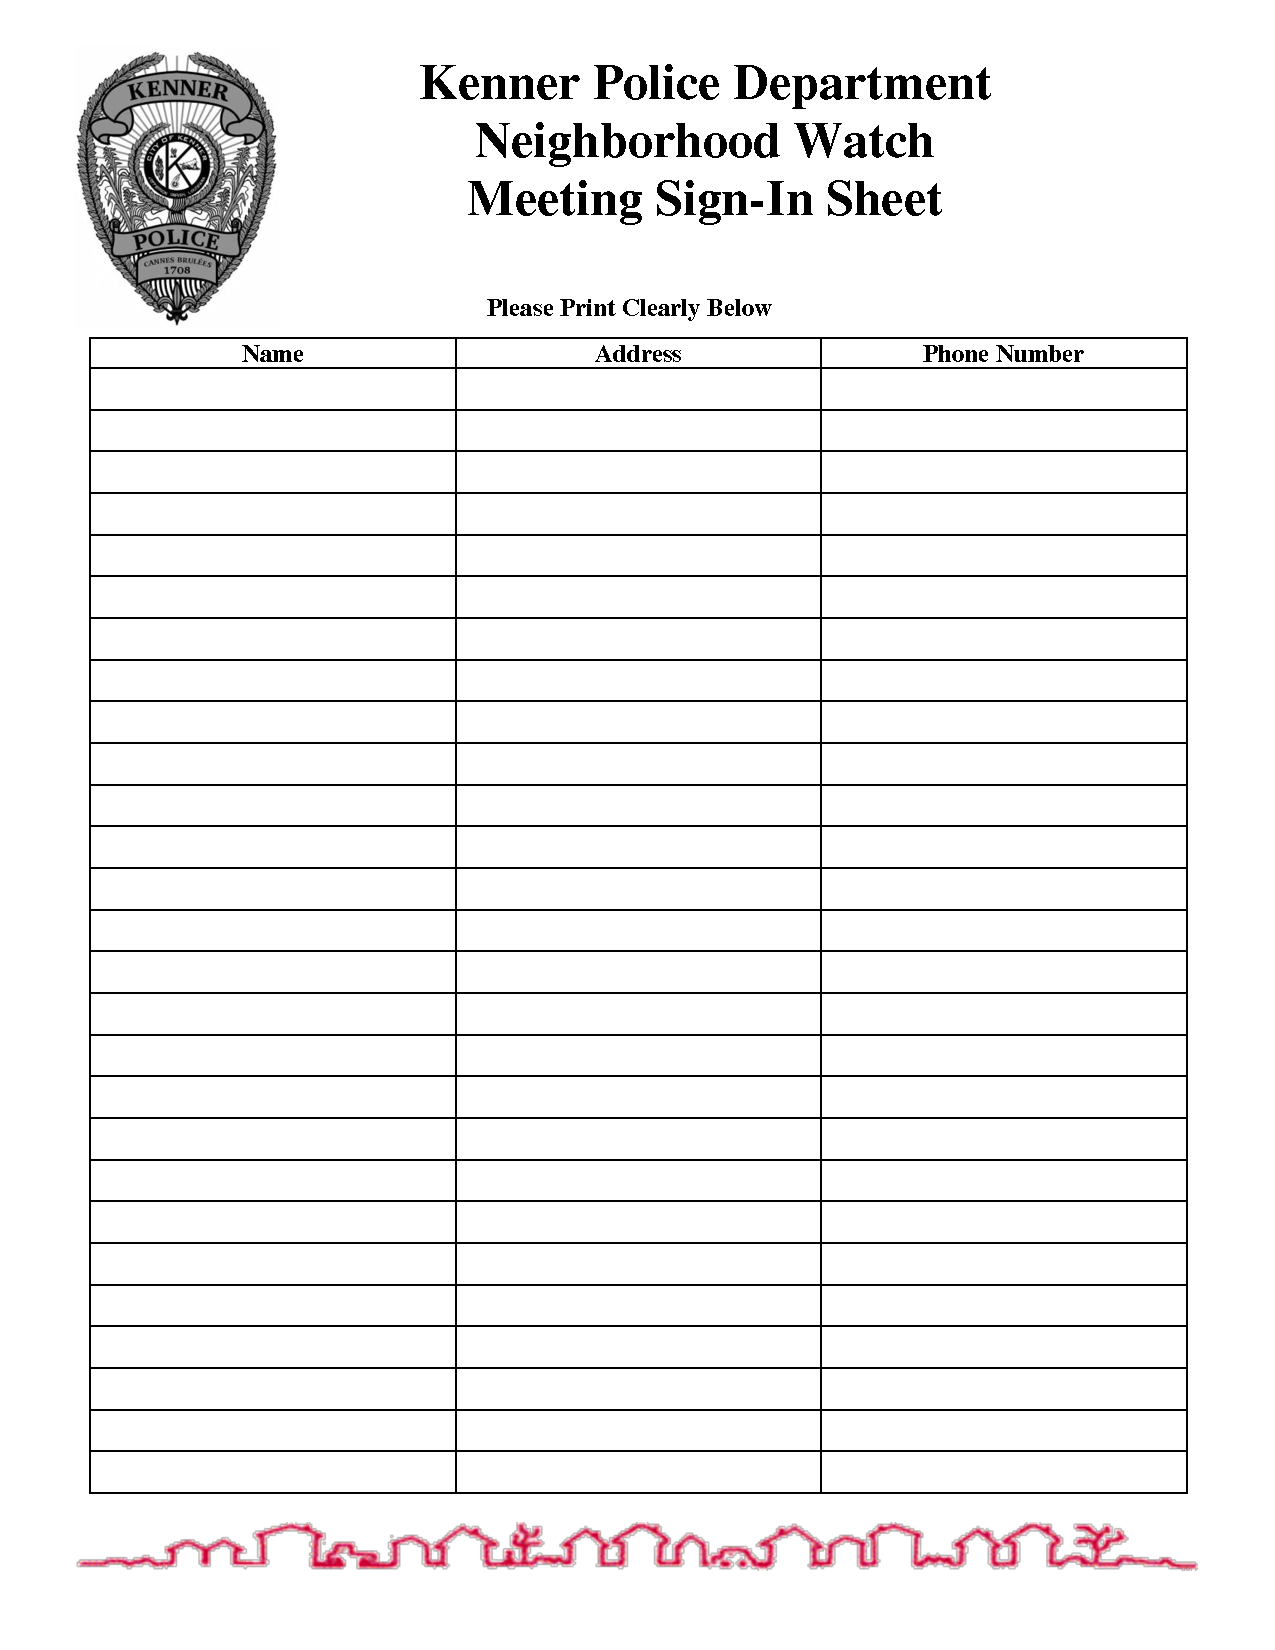 5-best-images-of-sign-in-sheet-printable-free-printable-sign-out